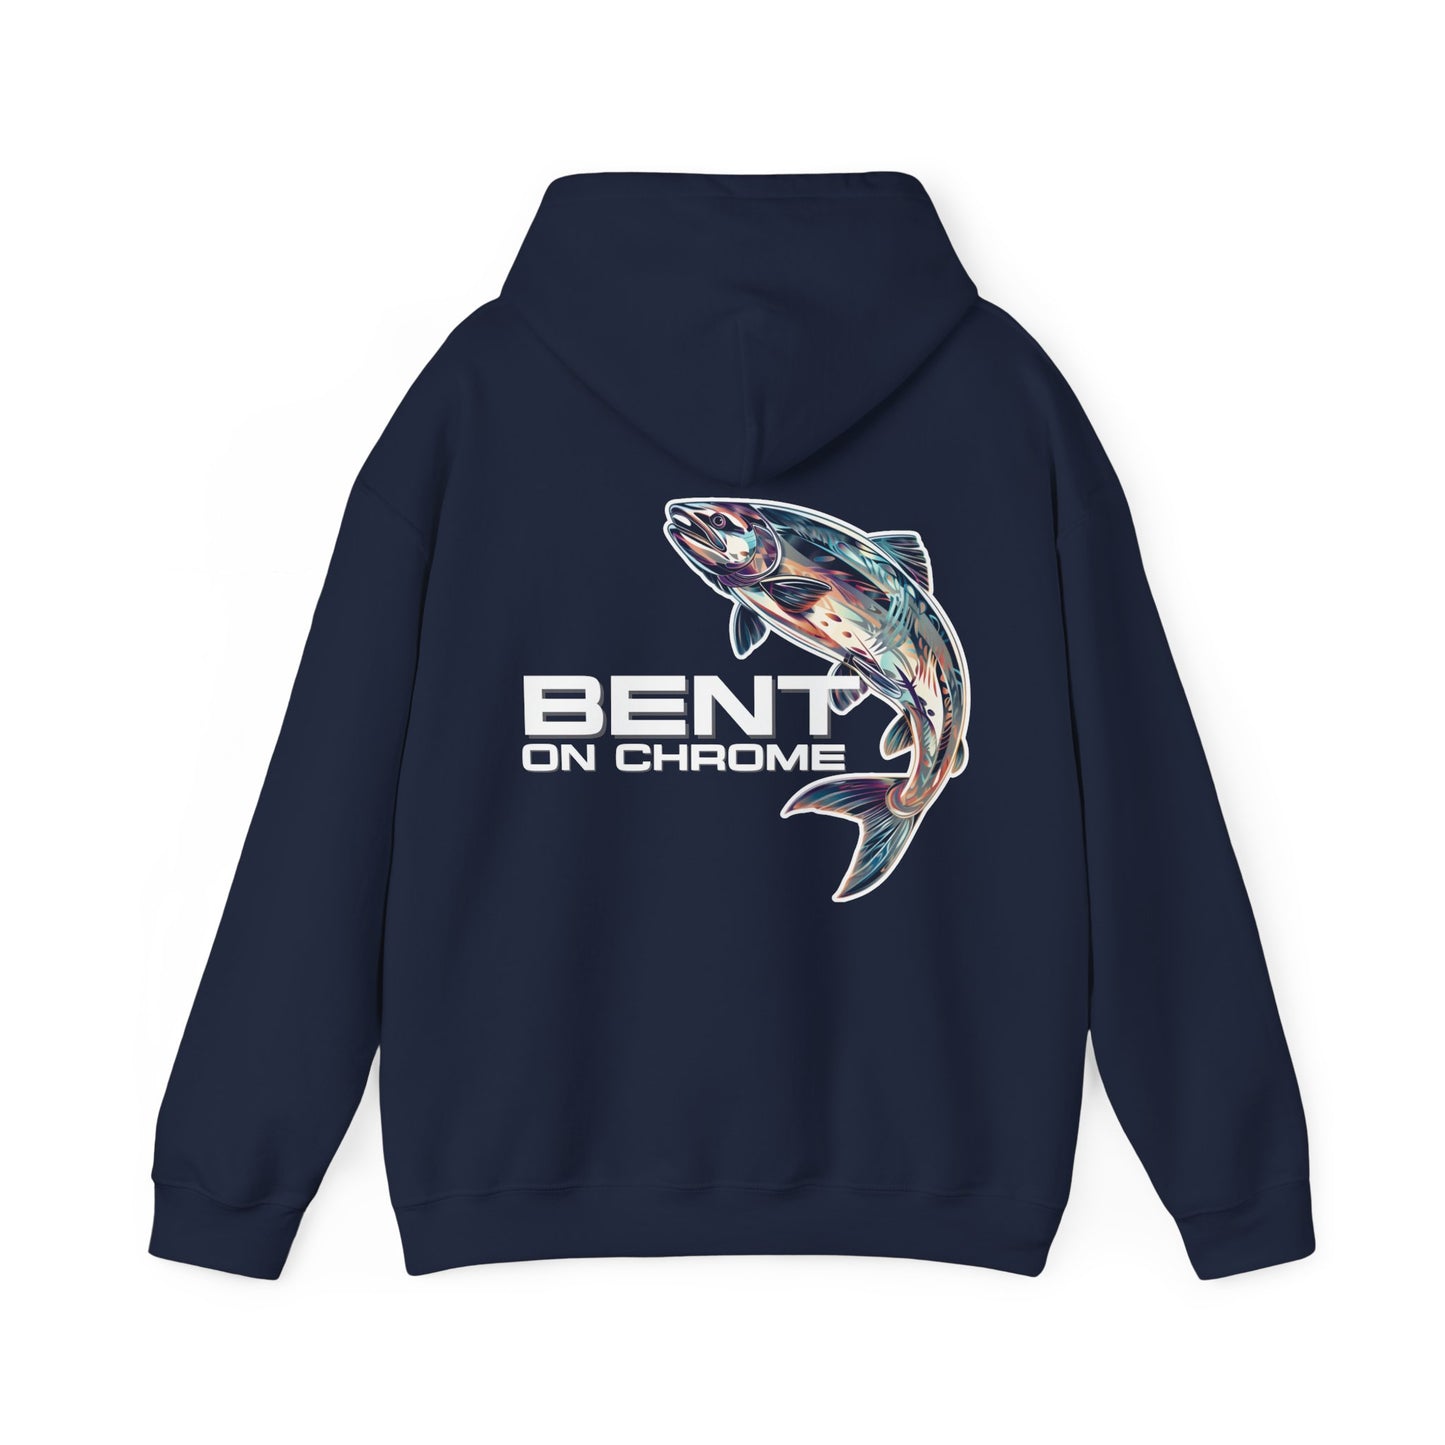 A Bent On Chrome - Silver Salmon - Cotton/Poly Blend Hoodie featuring a colorful graphic of a fish, with the text "Bent On Chrome" underneath, displayed on a white background.